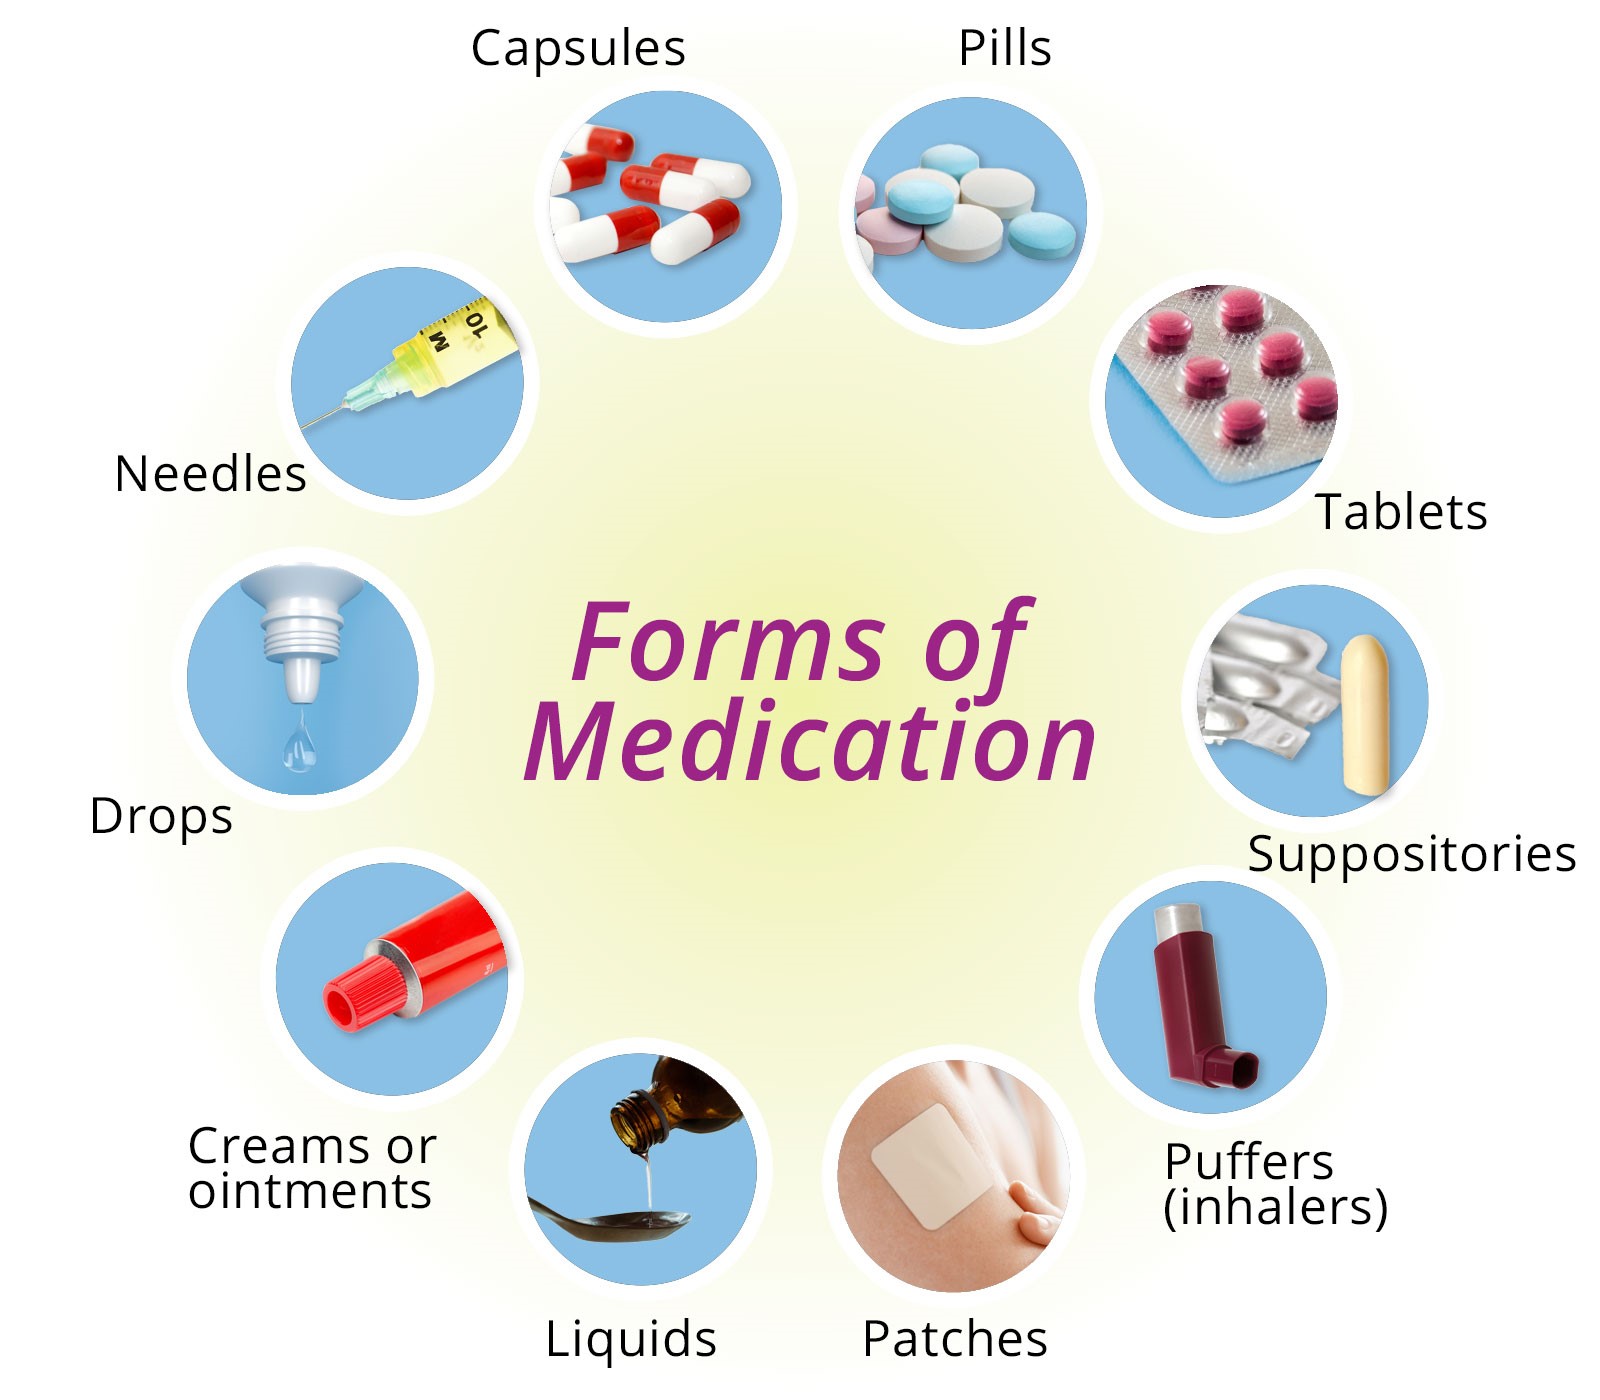 Forms of medication
